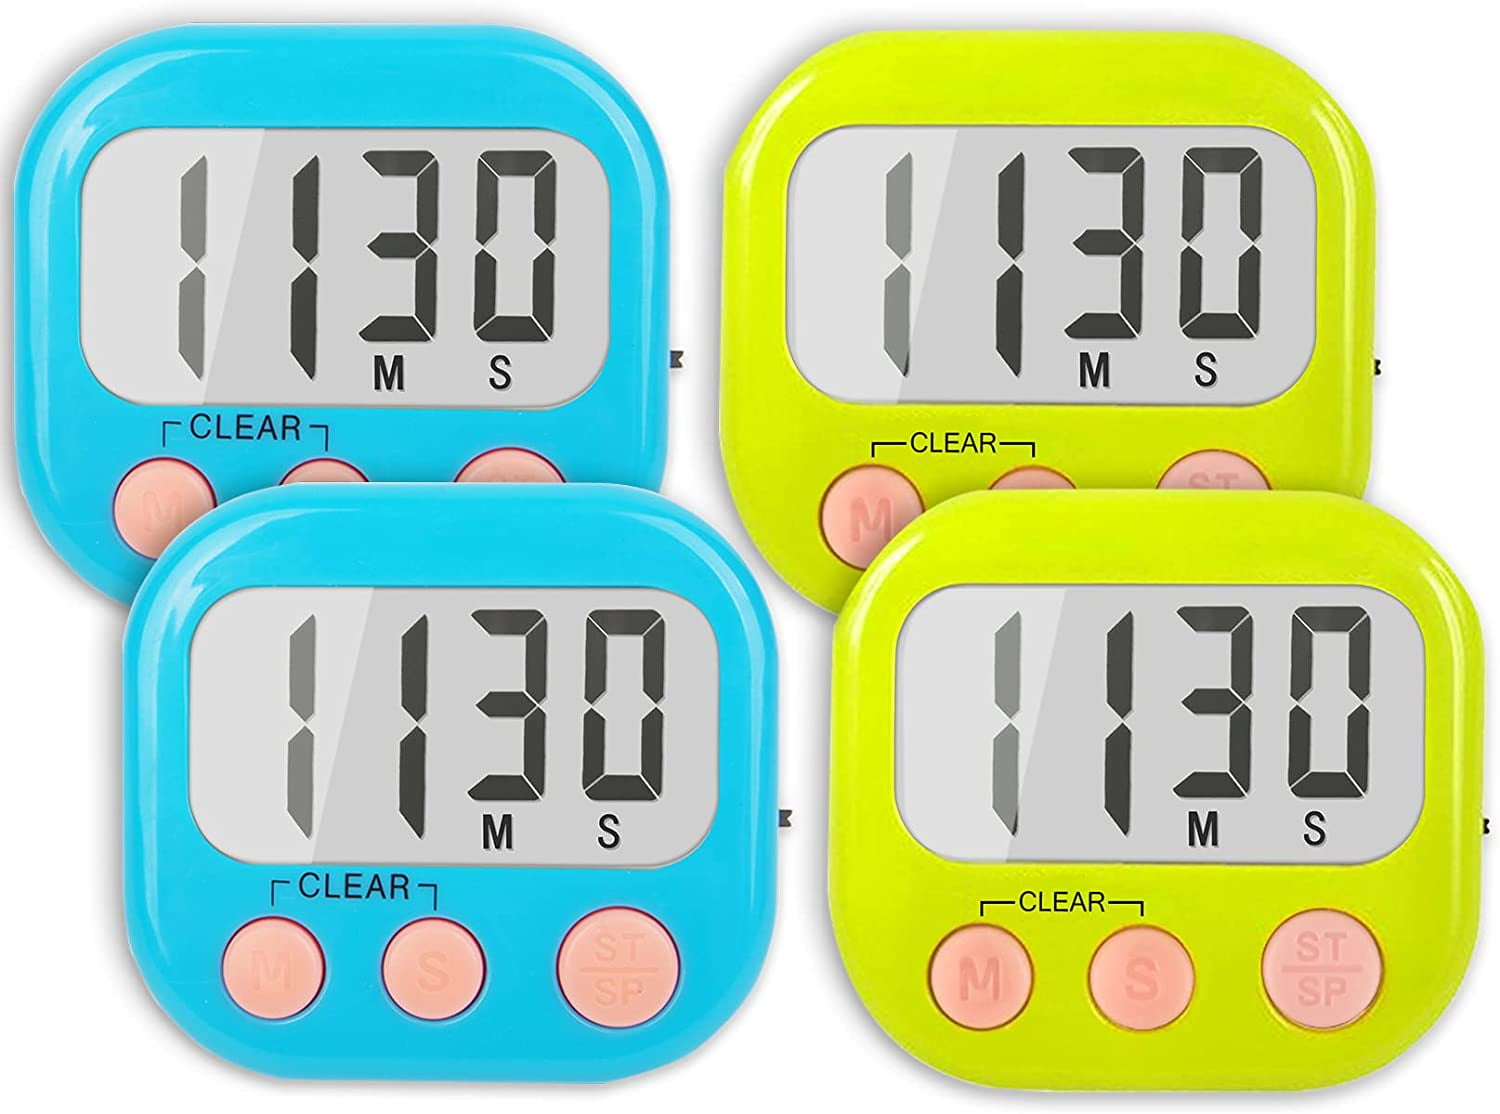  Classroom Timers for Teachers Kids Large Magnetic Digital Timer  2 Pack : Office Products